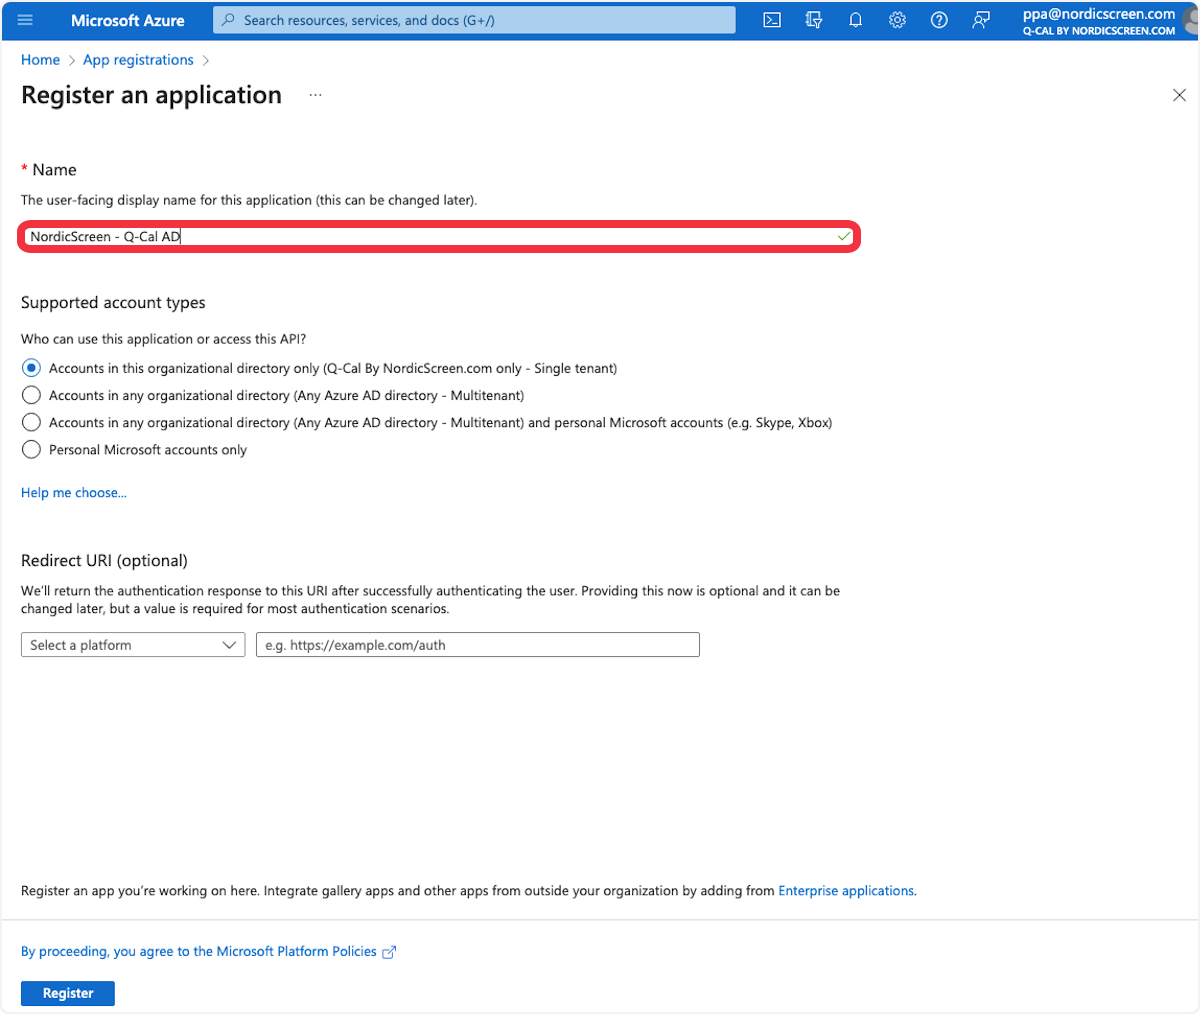 Microsoft Azure application registration form with 'Name' field filled as 'NordicScreen - Q-Cal AD' for a new application setup.